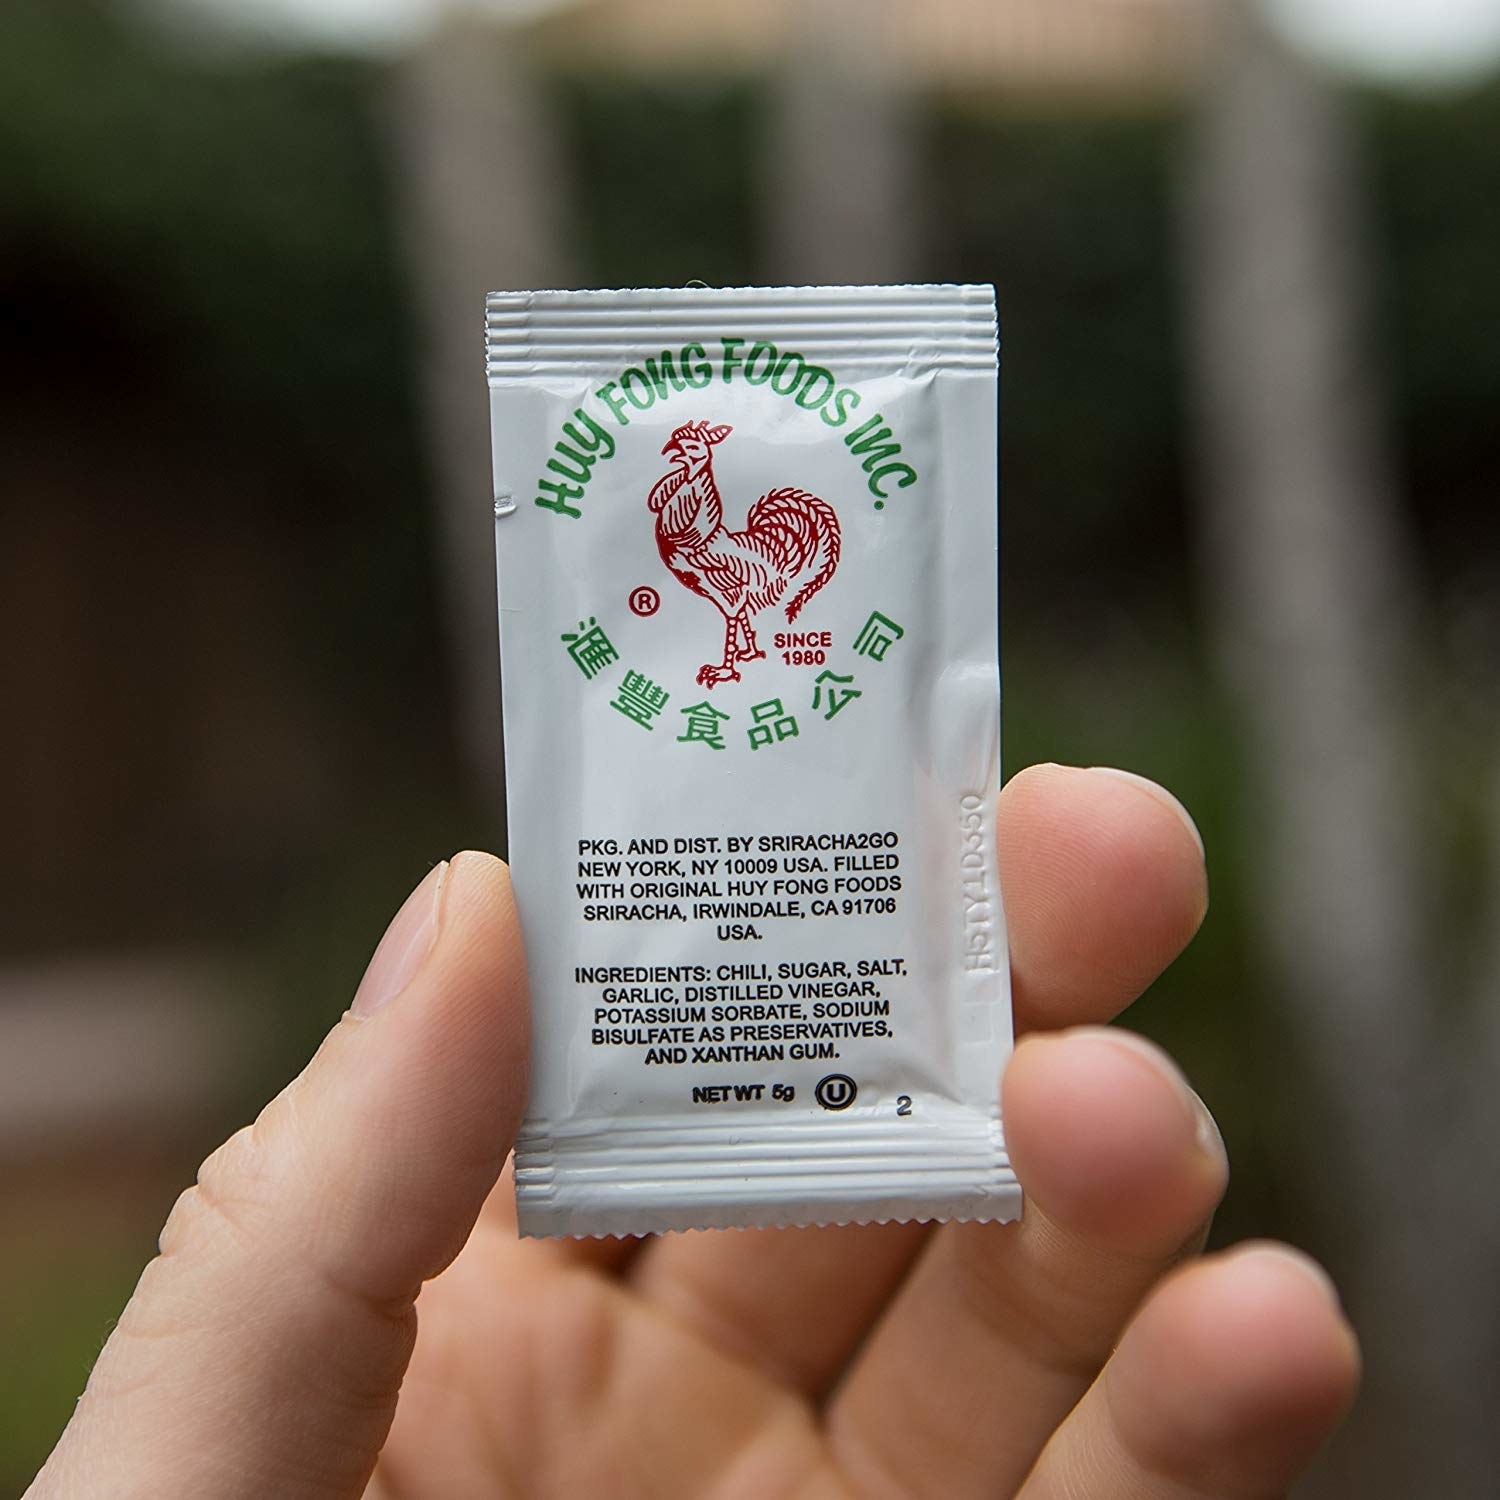 The sauce packet